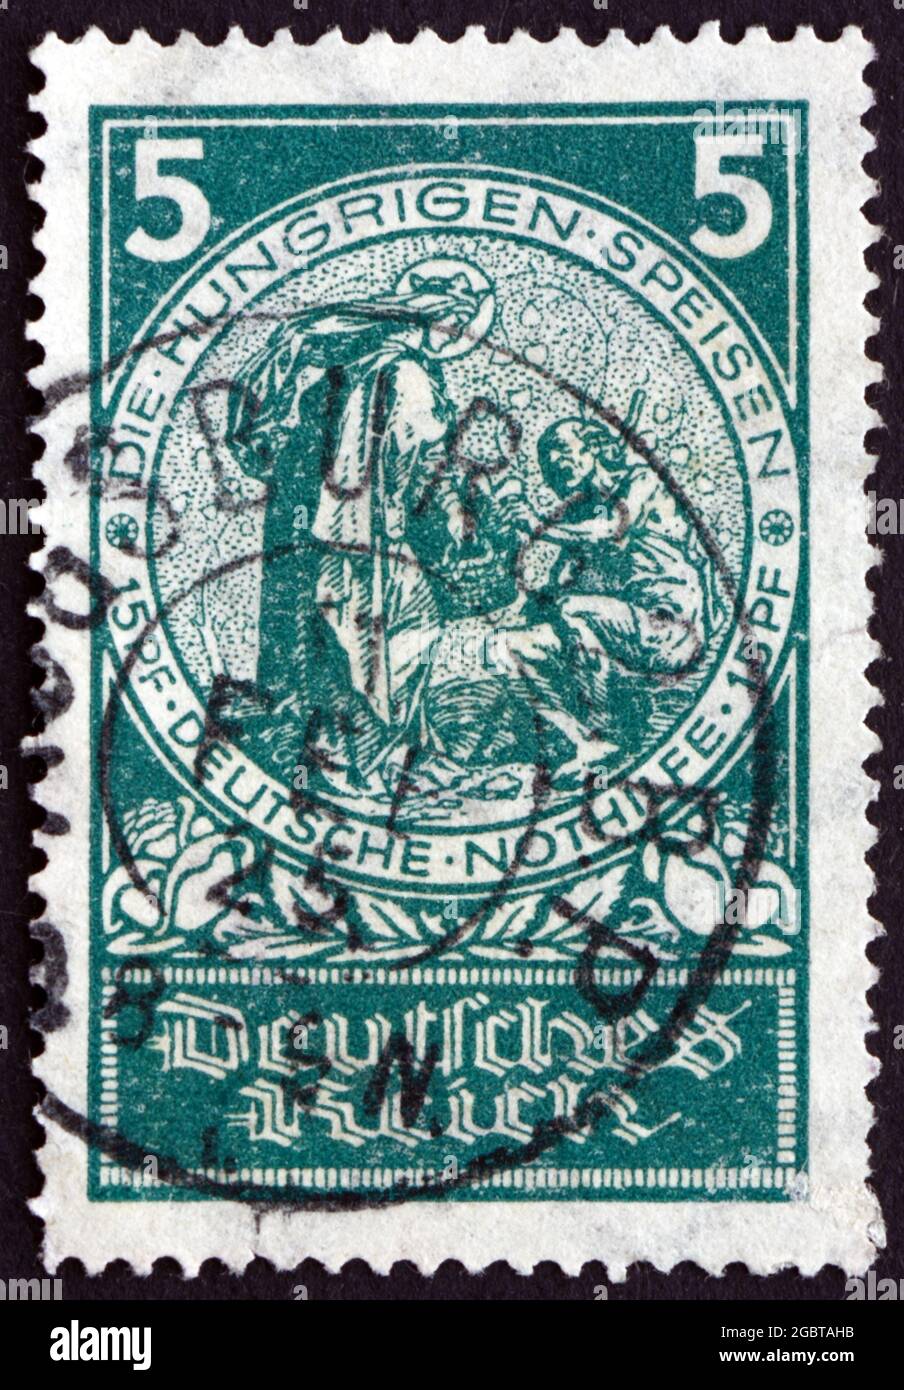 GERMANY - CIRCA 1924: a stamp printed in the Germany shows Feeding the Hungry, Social Welfare, circa 1924 Stock Photo